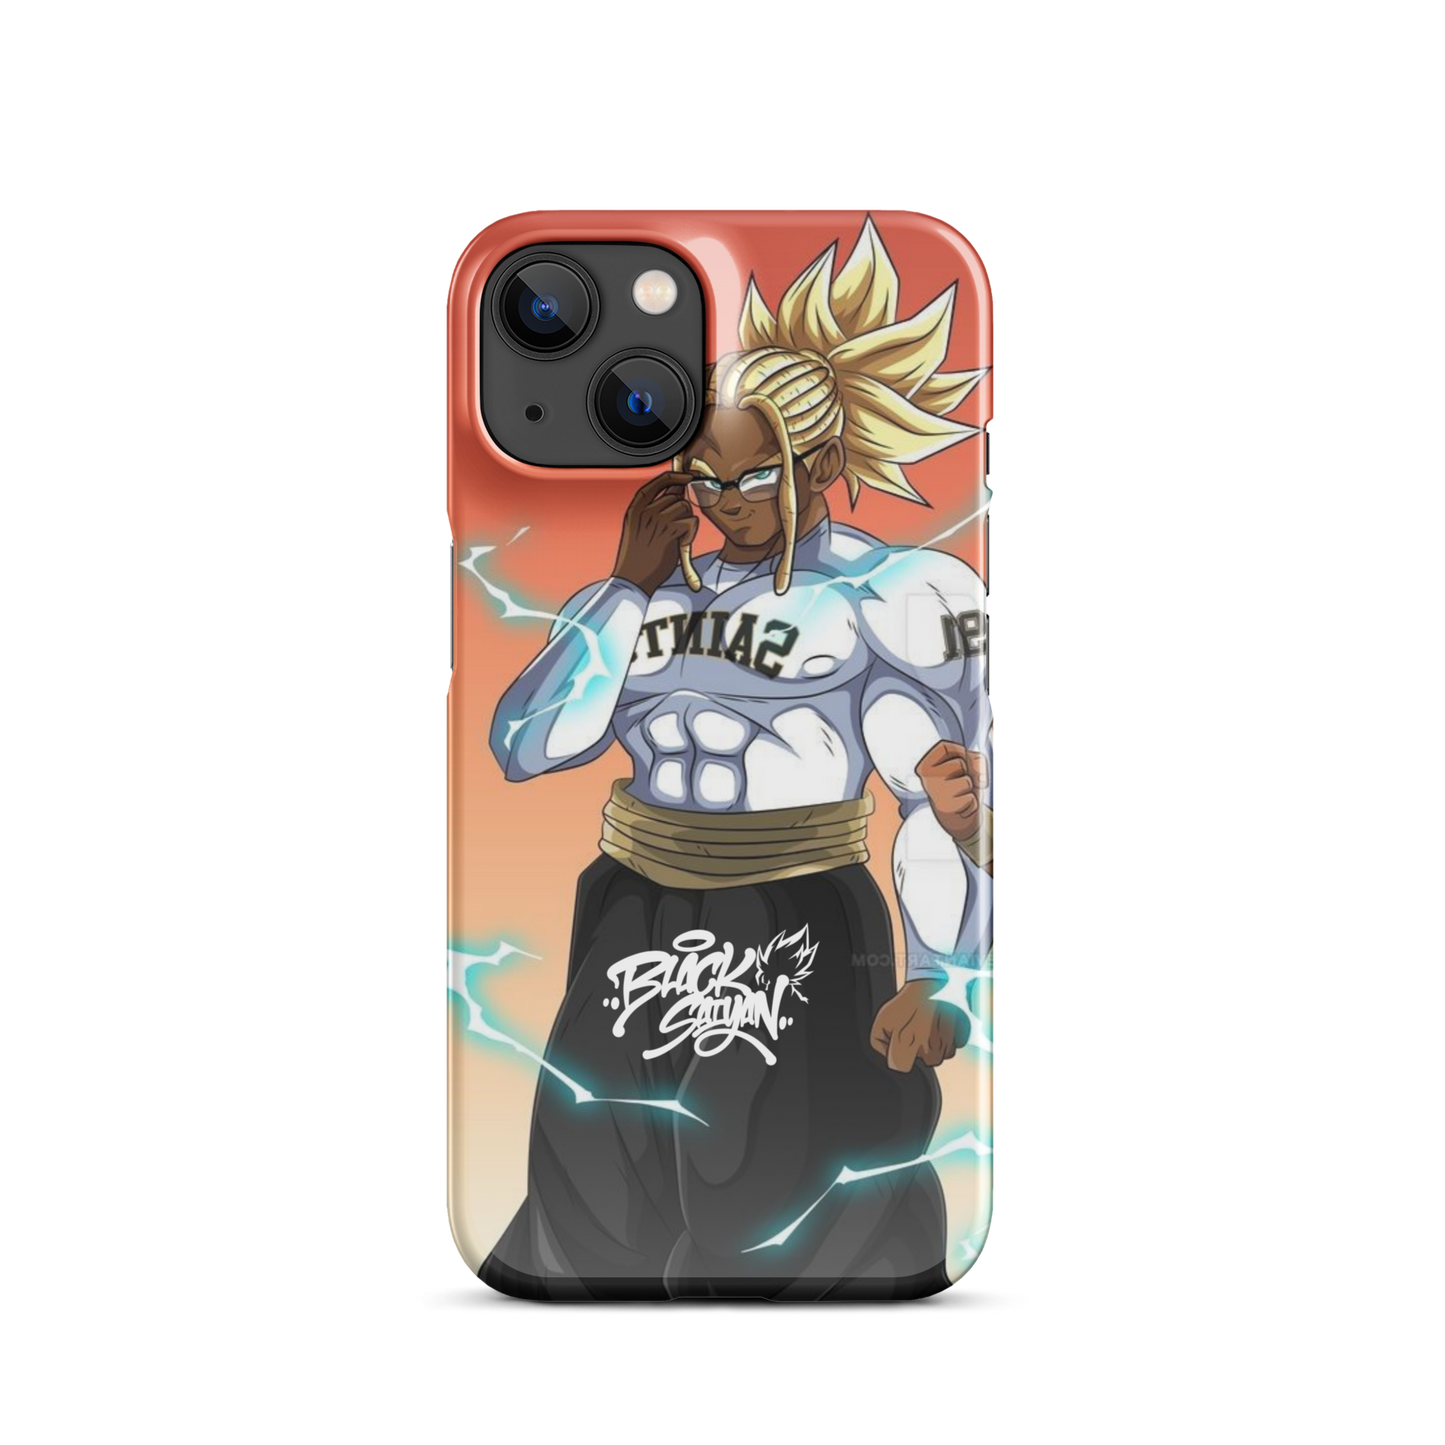 BLACK SAIYAN 1/2 COUPLE MATCHING PHONE CASES - Snap case for iPhone®